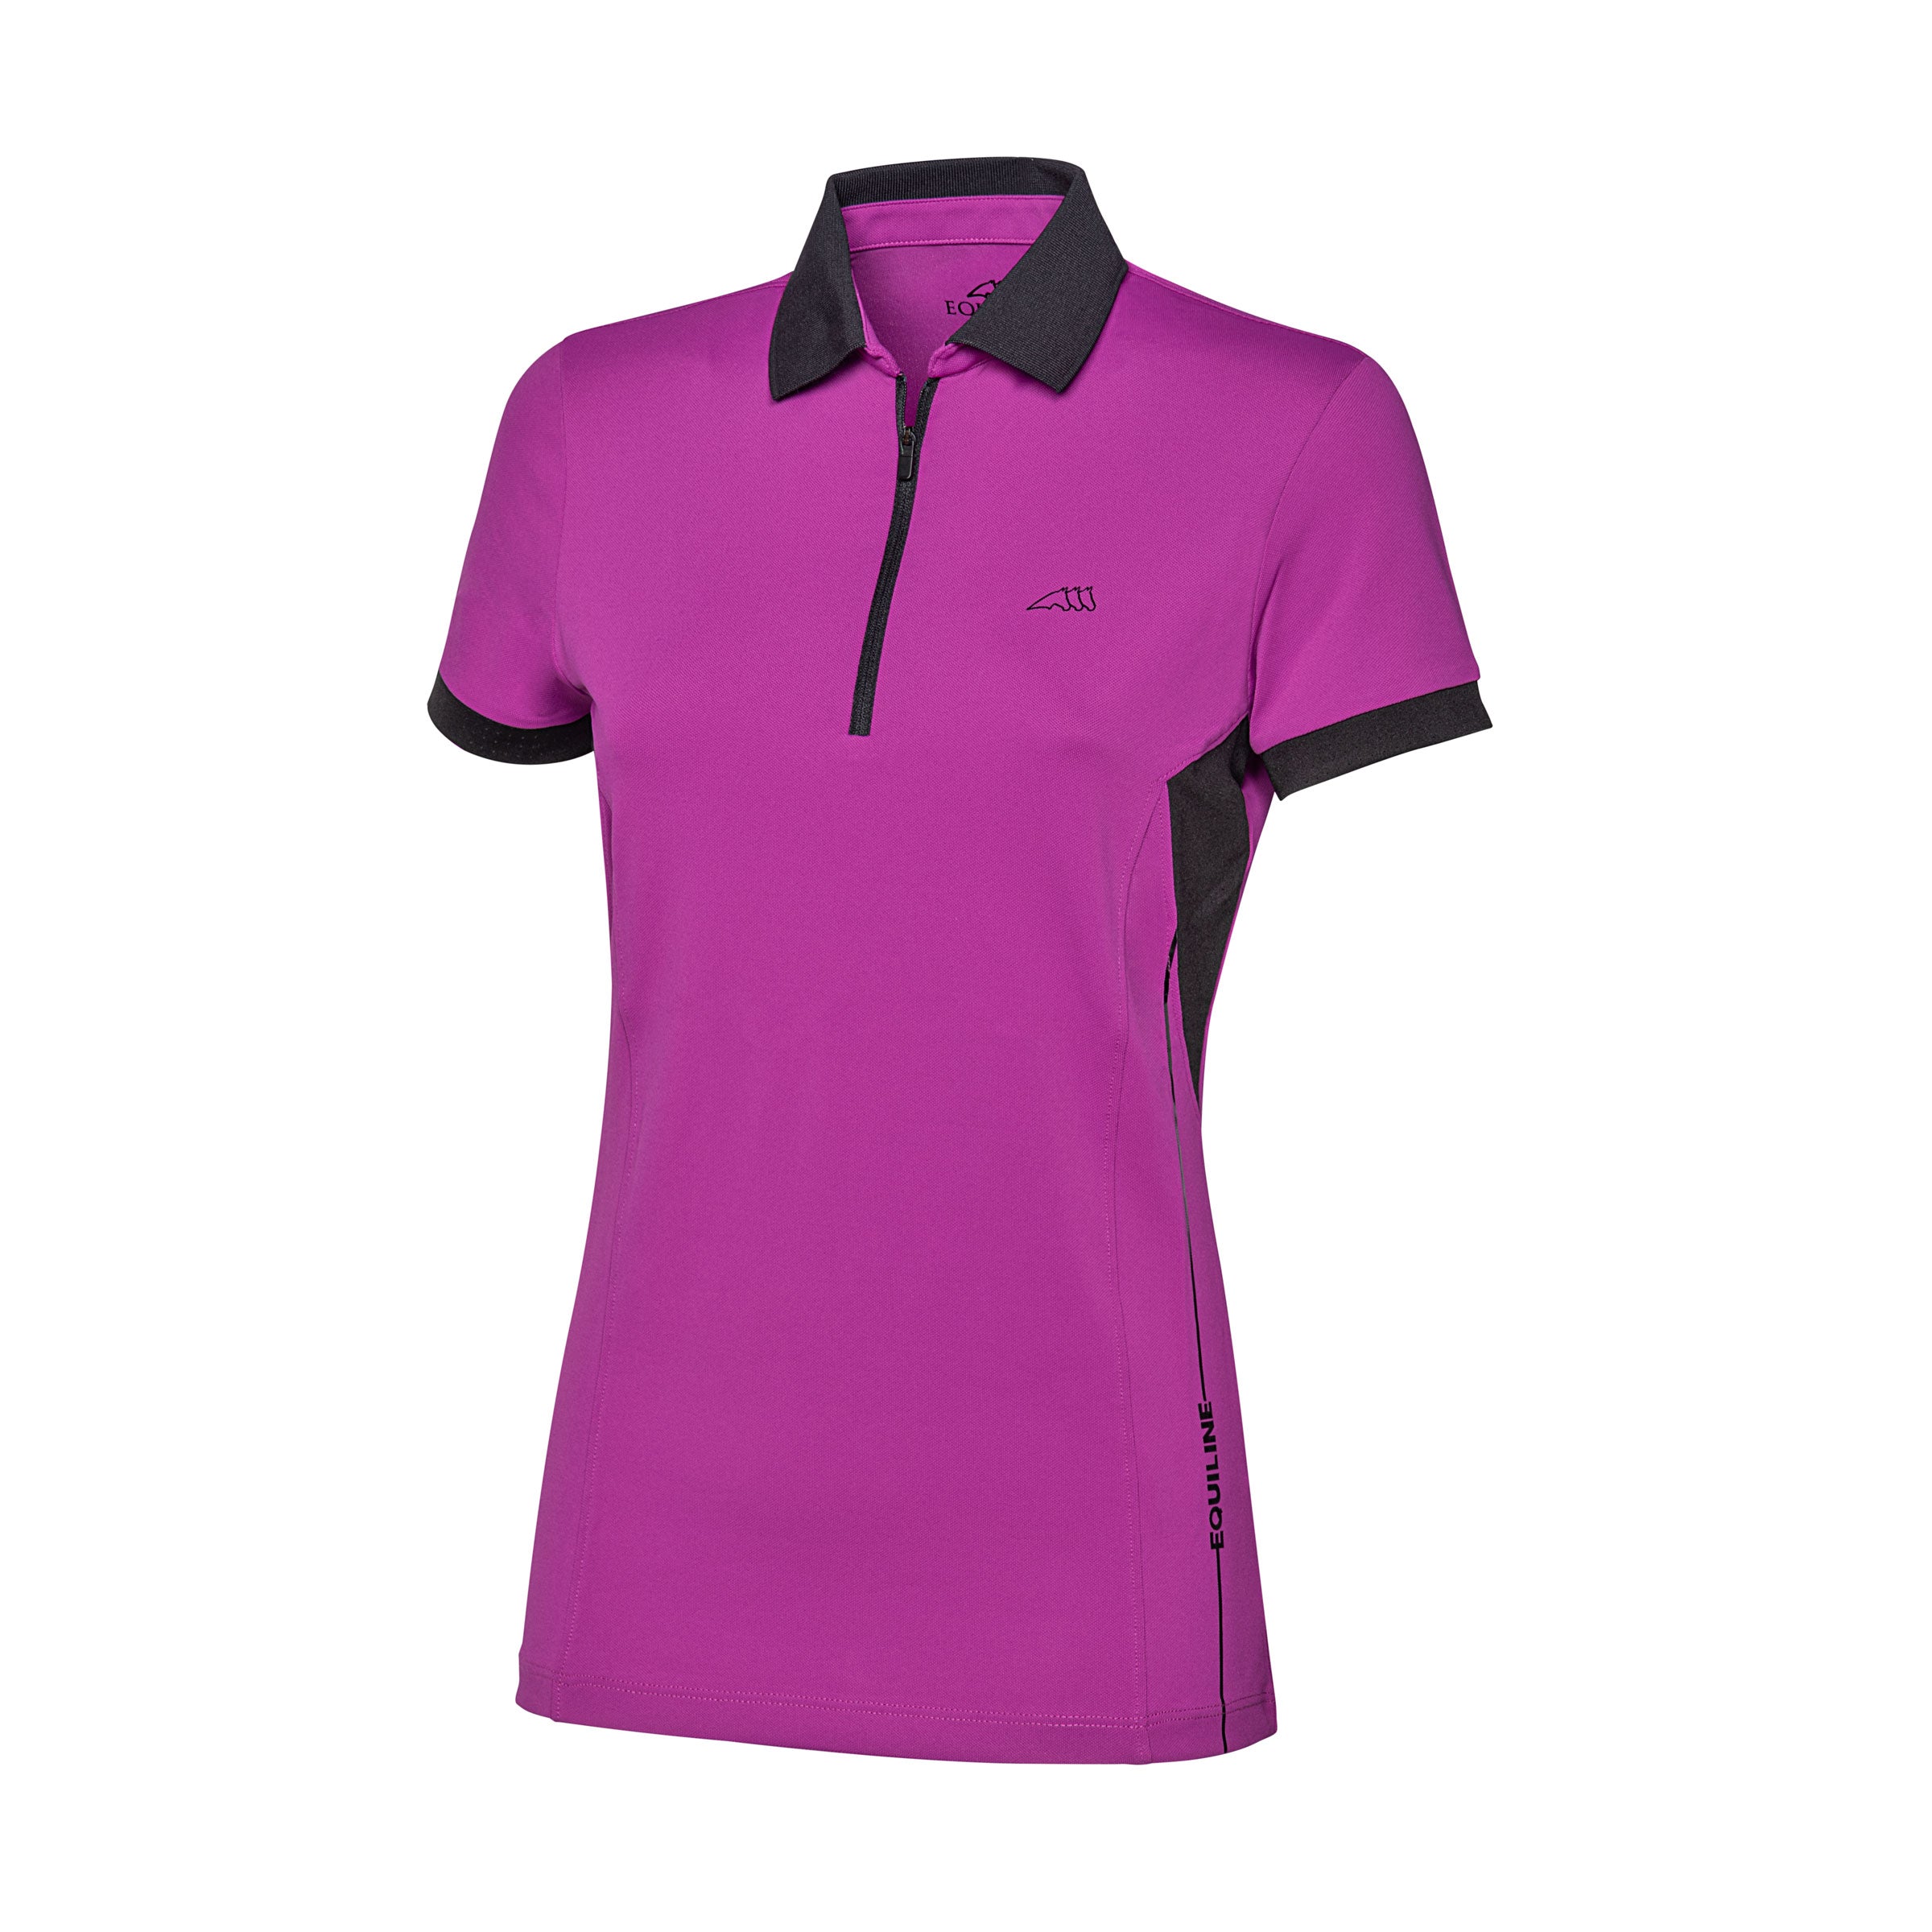 Equiline Cybelec Polo Shirt